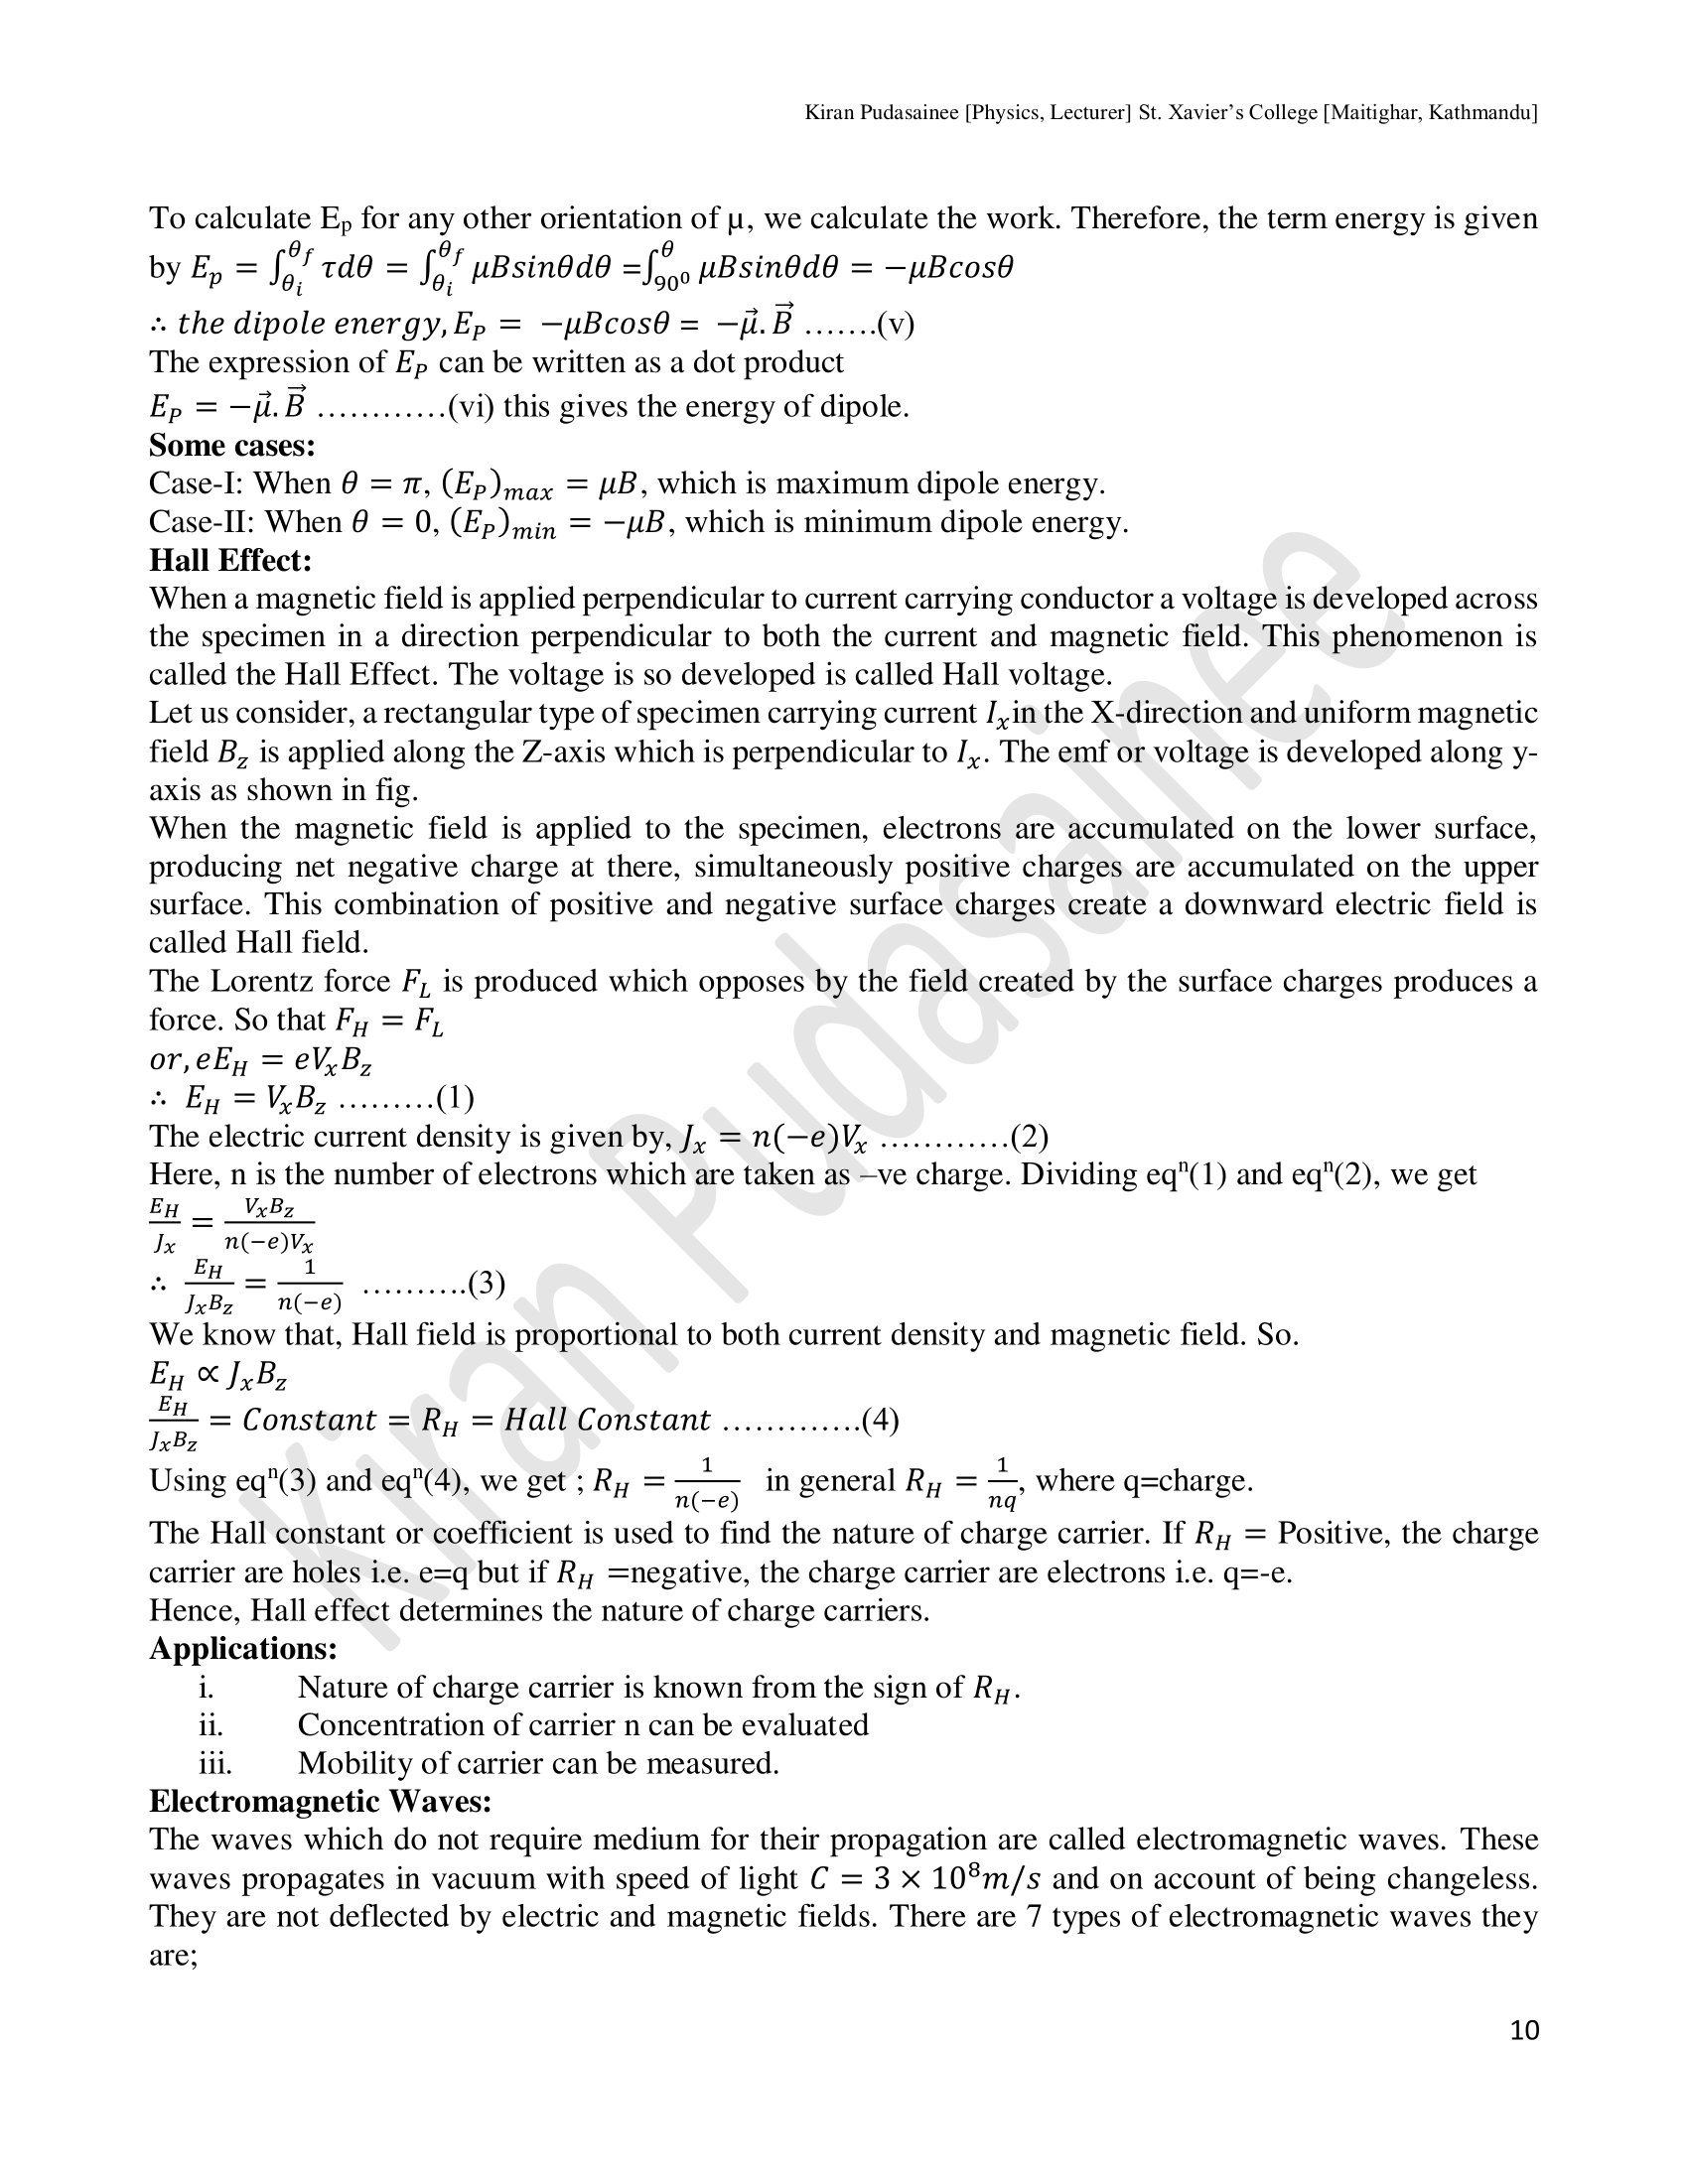 Electrical And Magnetic Field & Potential: B.Sc. CSIT Physics Unit 2 Notes